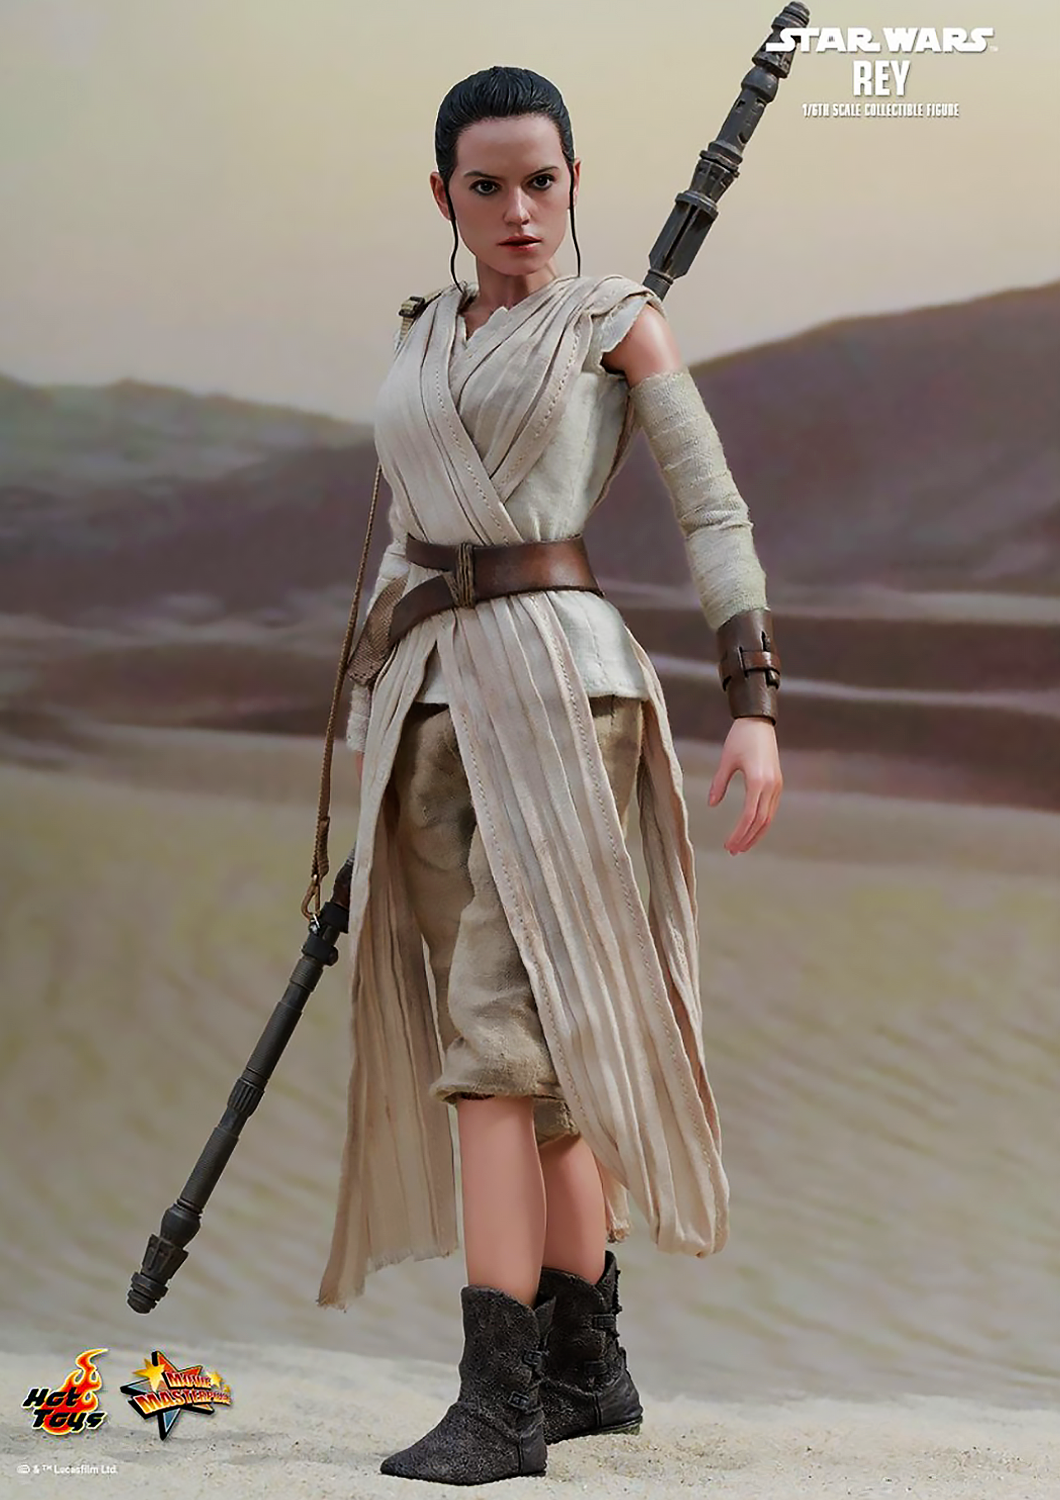 HOT TOYS STAR WARS EPISODE VII: THE FORCE AWAKENS - REY SOLO 1/6 MMS336 - Anotoys Collectibles